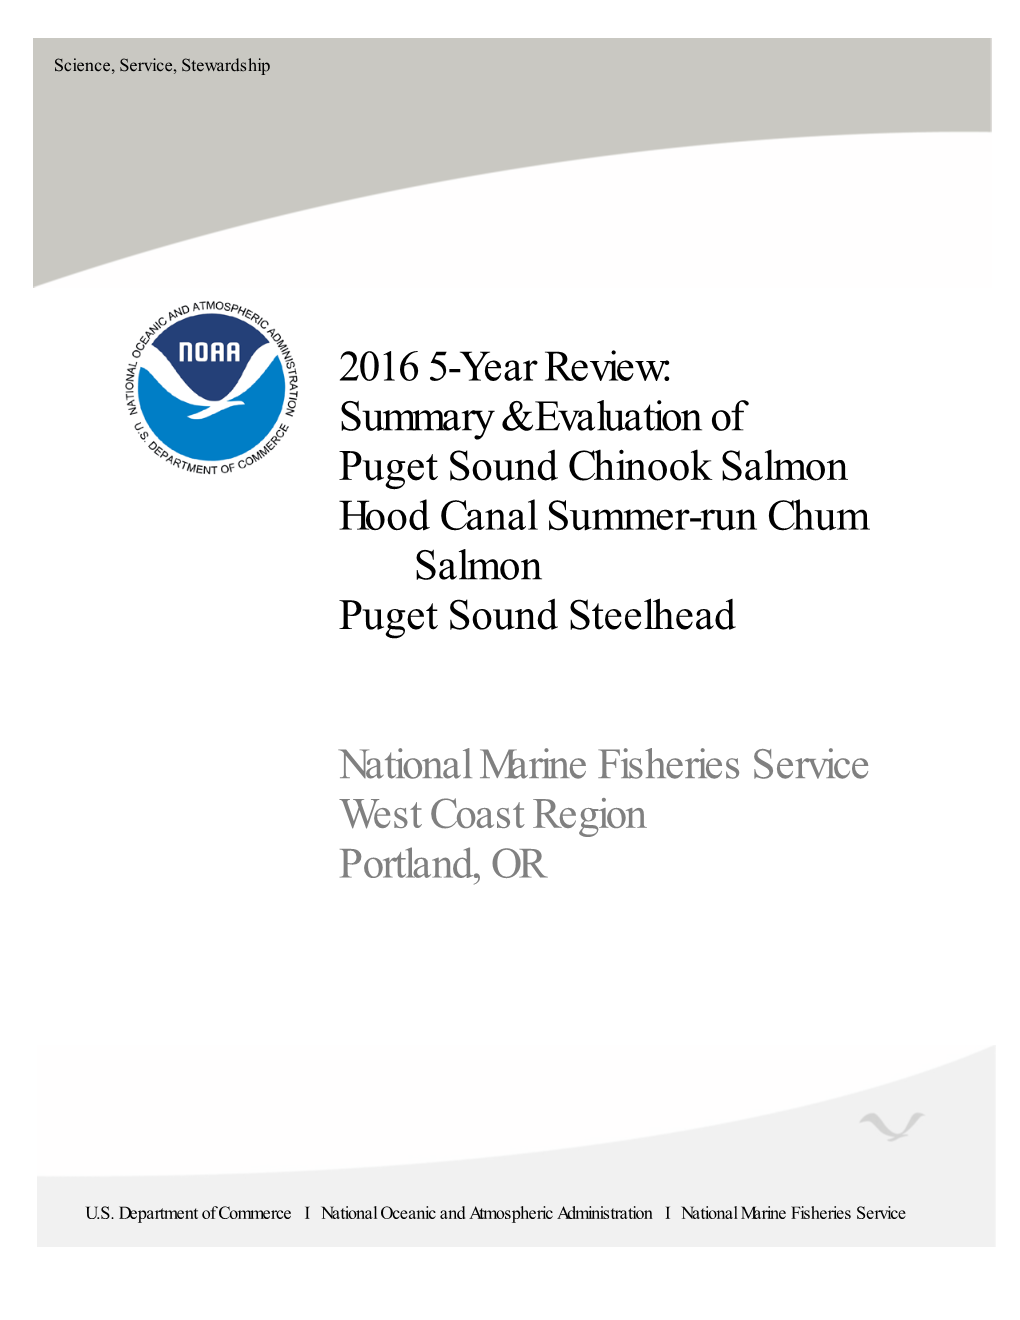 2016 5-Year Review Summary and Evaluation Puget Sound Chinook Salmon Hood Canal Summer-Run Chum Salmon Puget Sound Steelhead